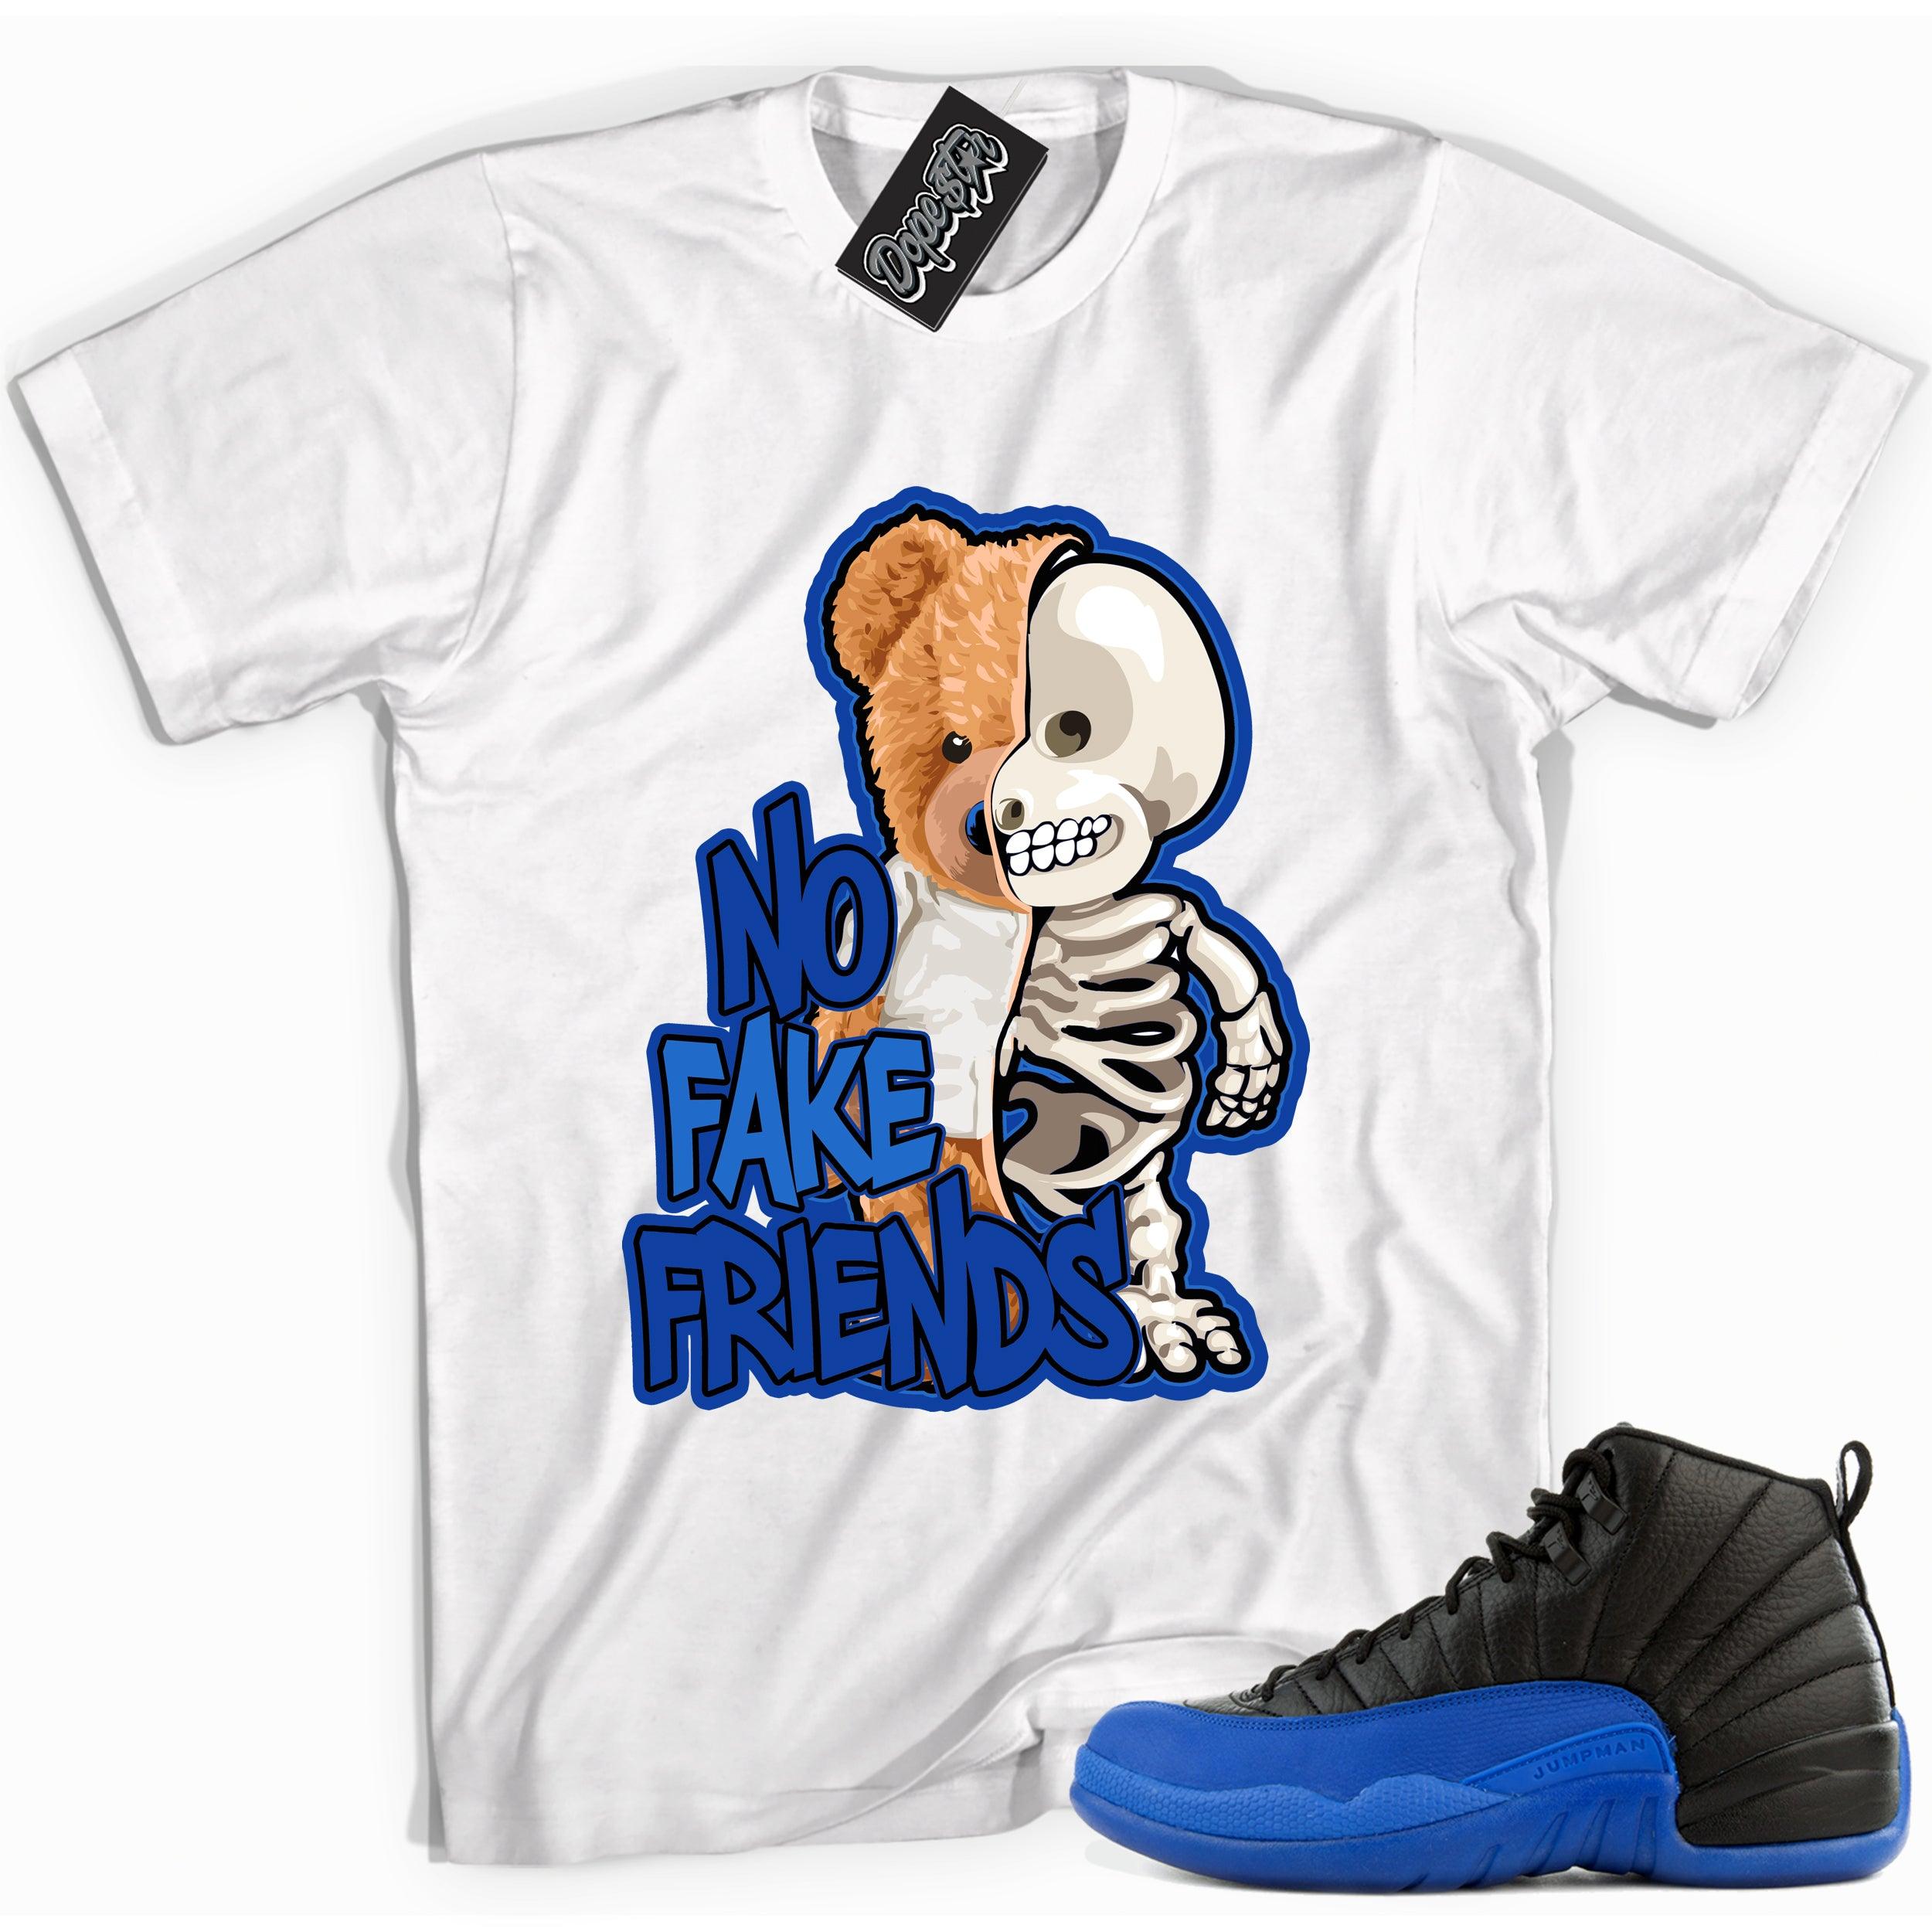 Cool white graphic tee with 'no fake friends' print, that perfectly matches Air Jordan 12 Retro Black Game Royal sneakers.